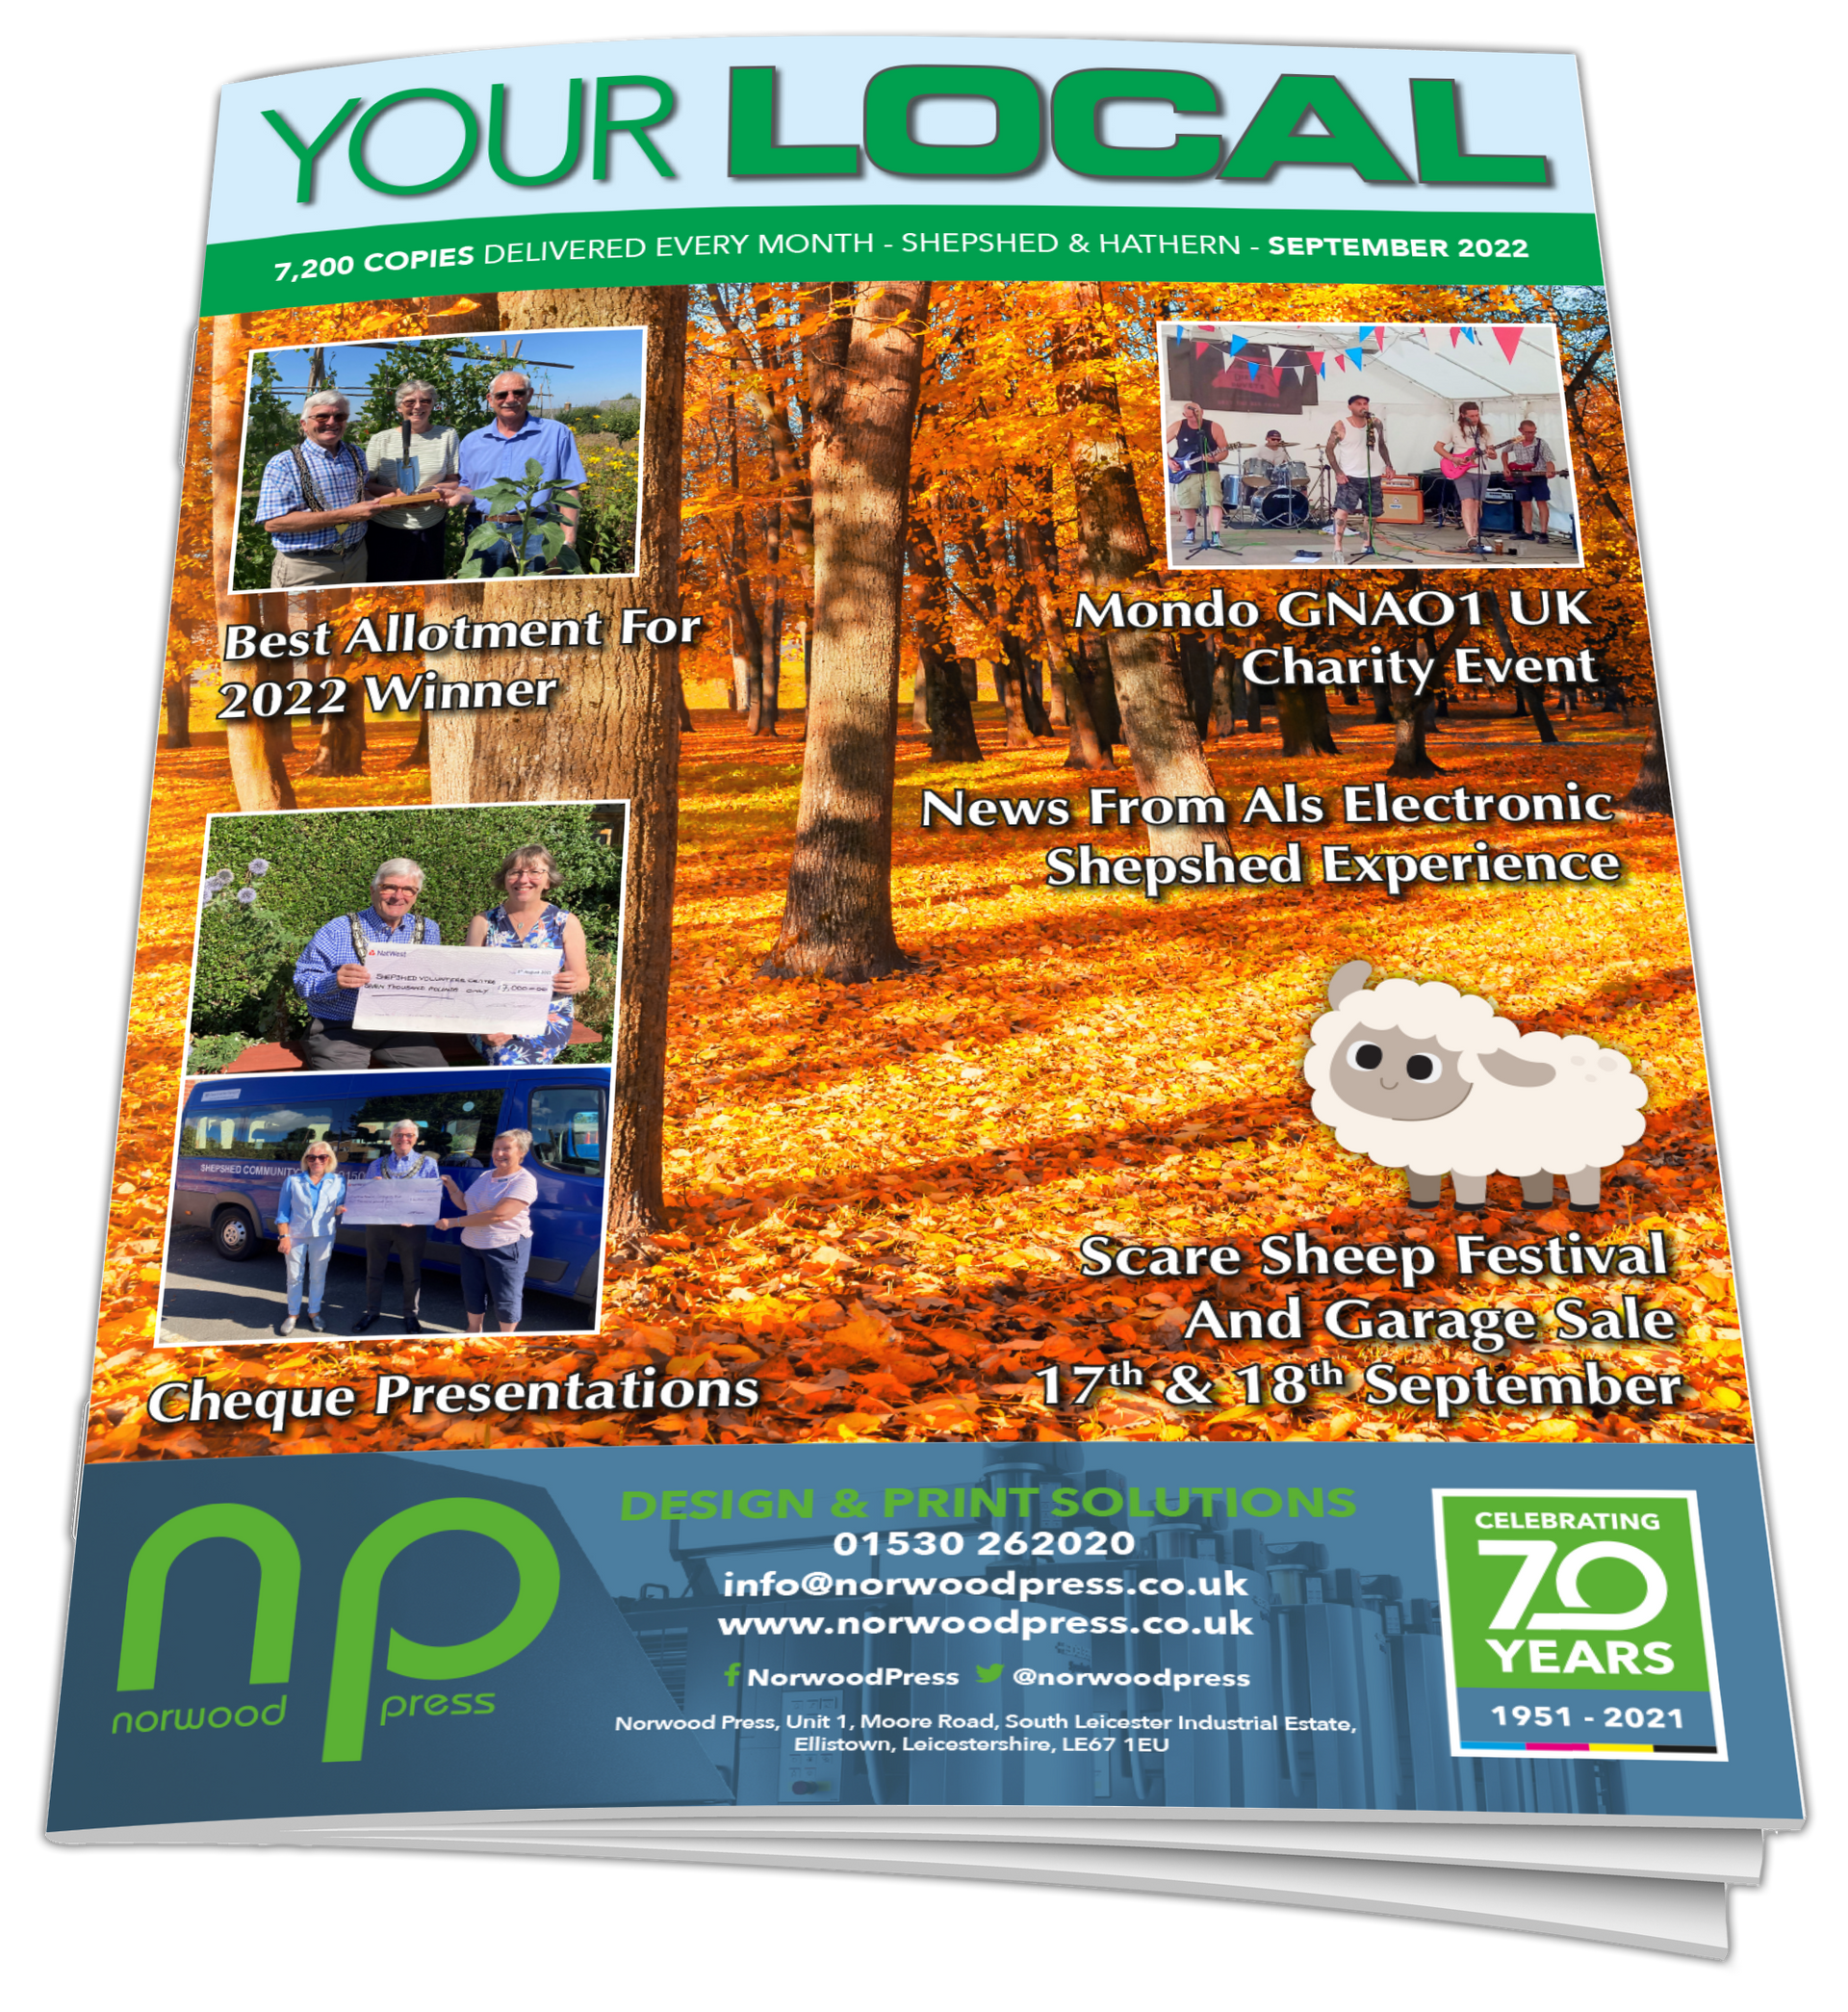 Your Local Magazine Shepshed & Hathern